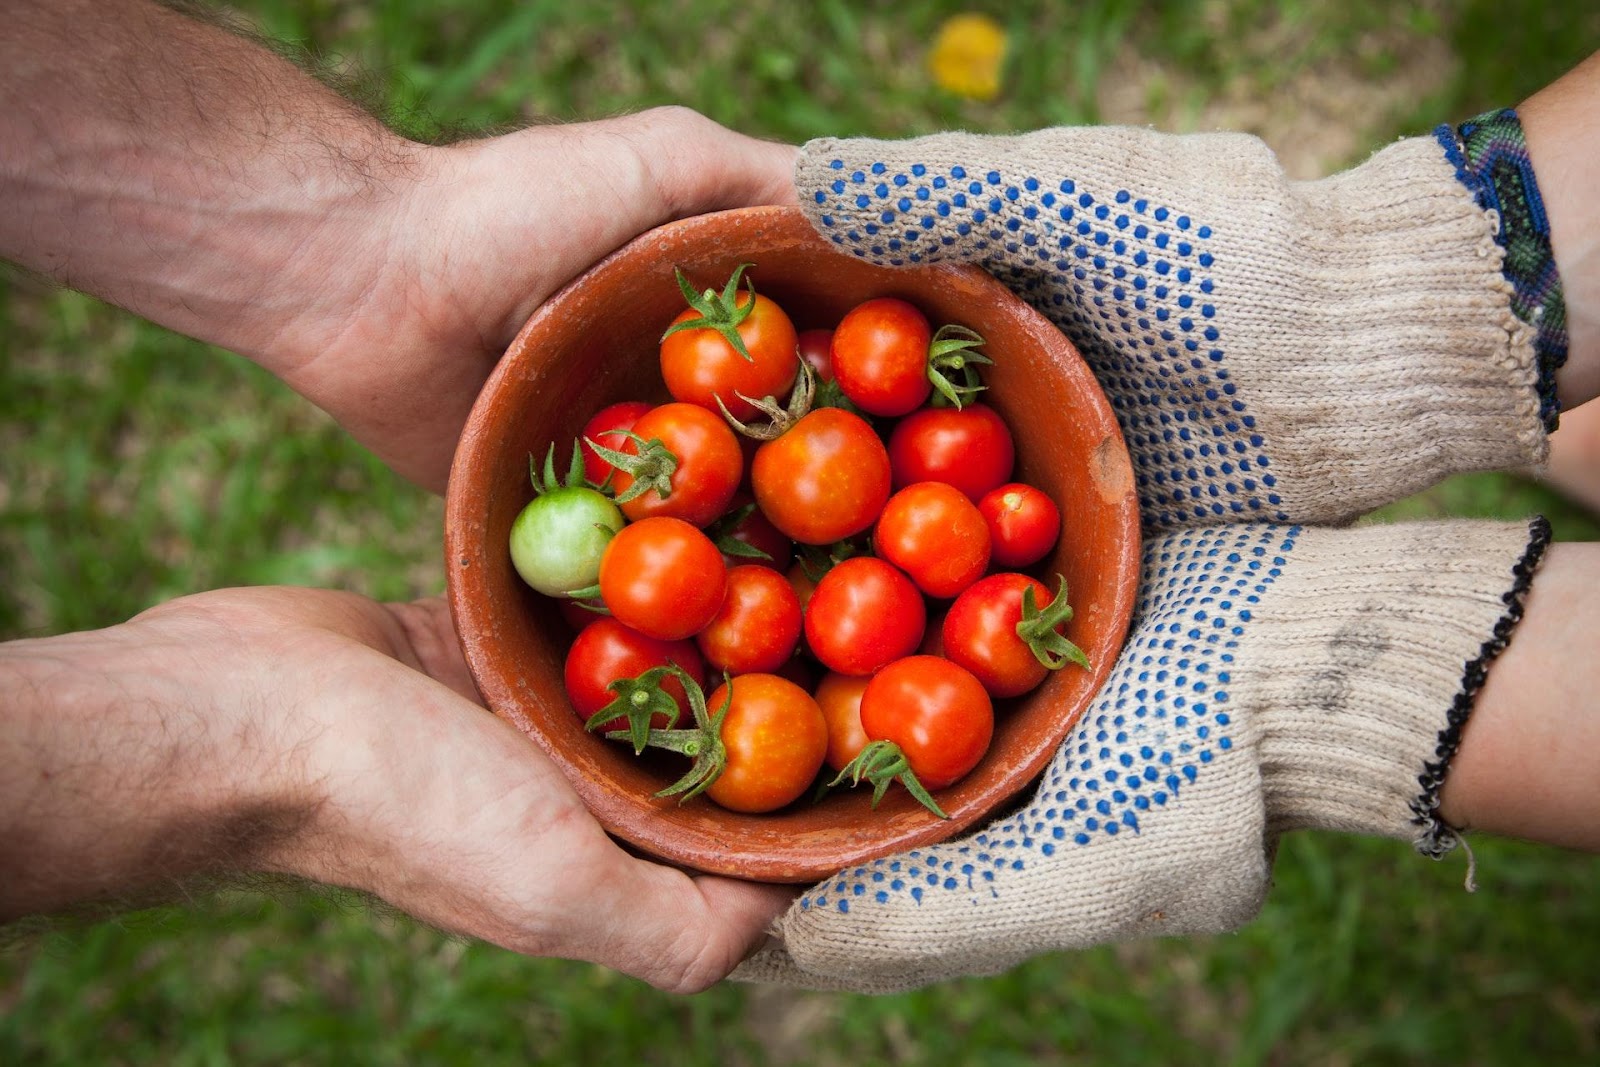 A person holding a bowl of tomatoes

Description automatically generated with low confidence